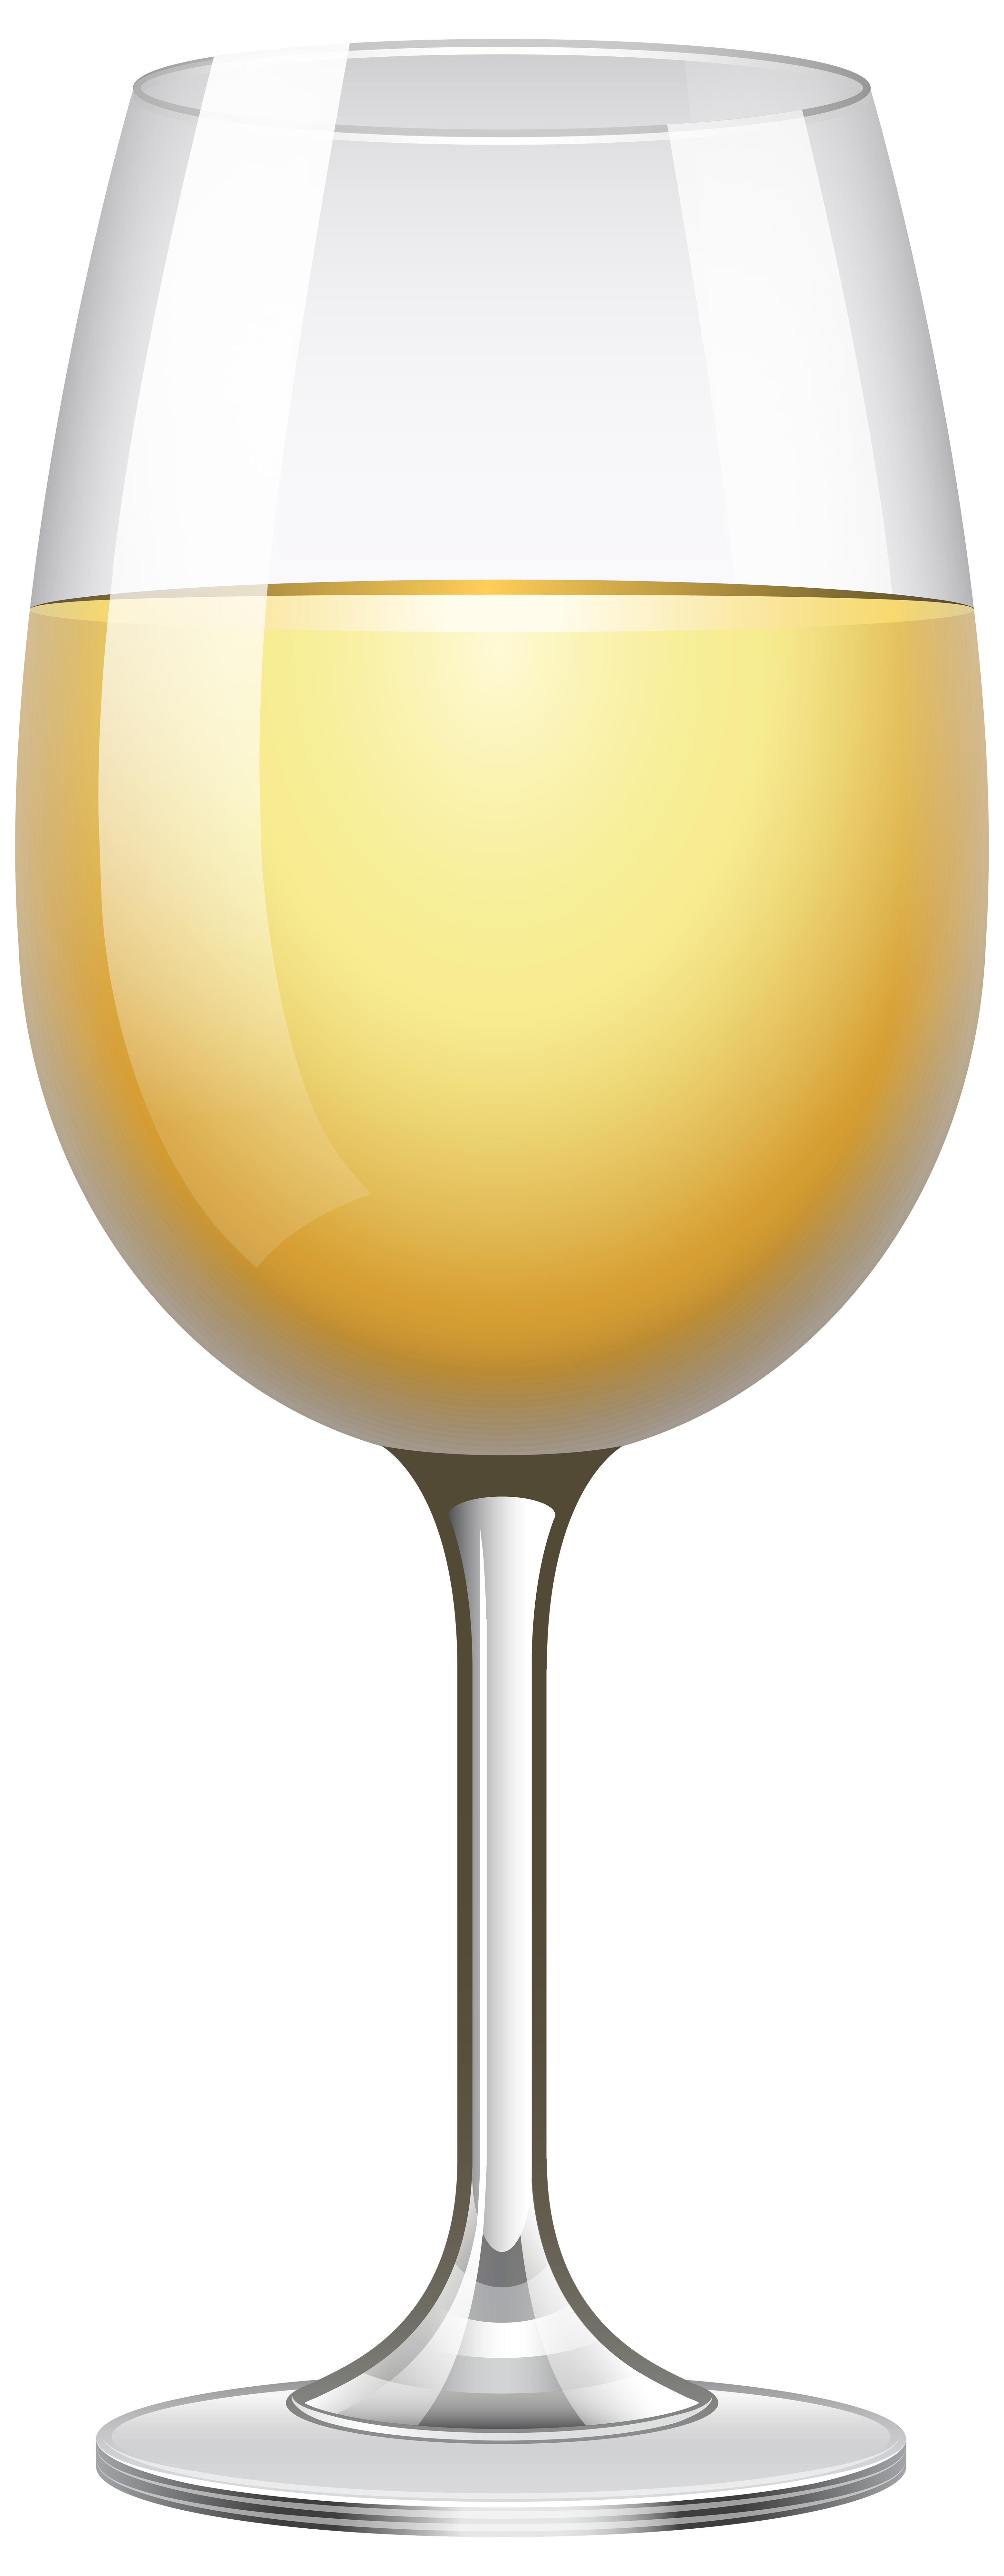 wine glass clip art pictures - photo #36